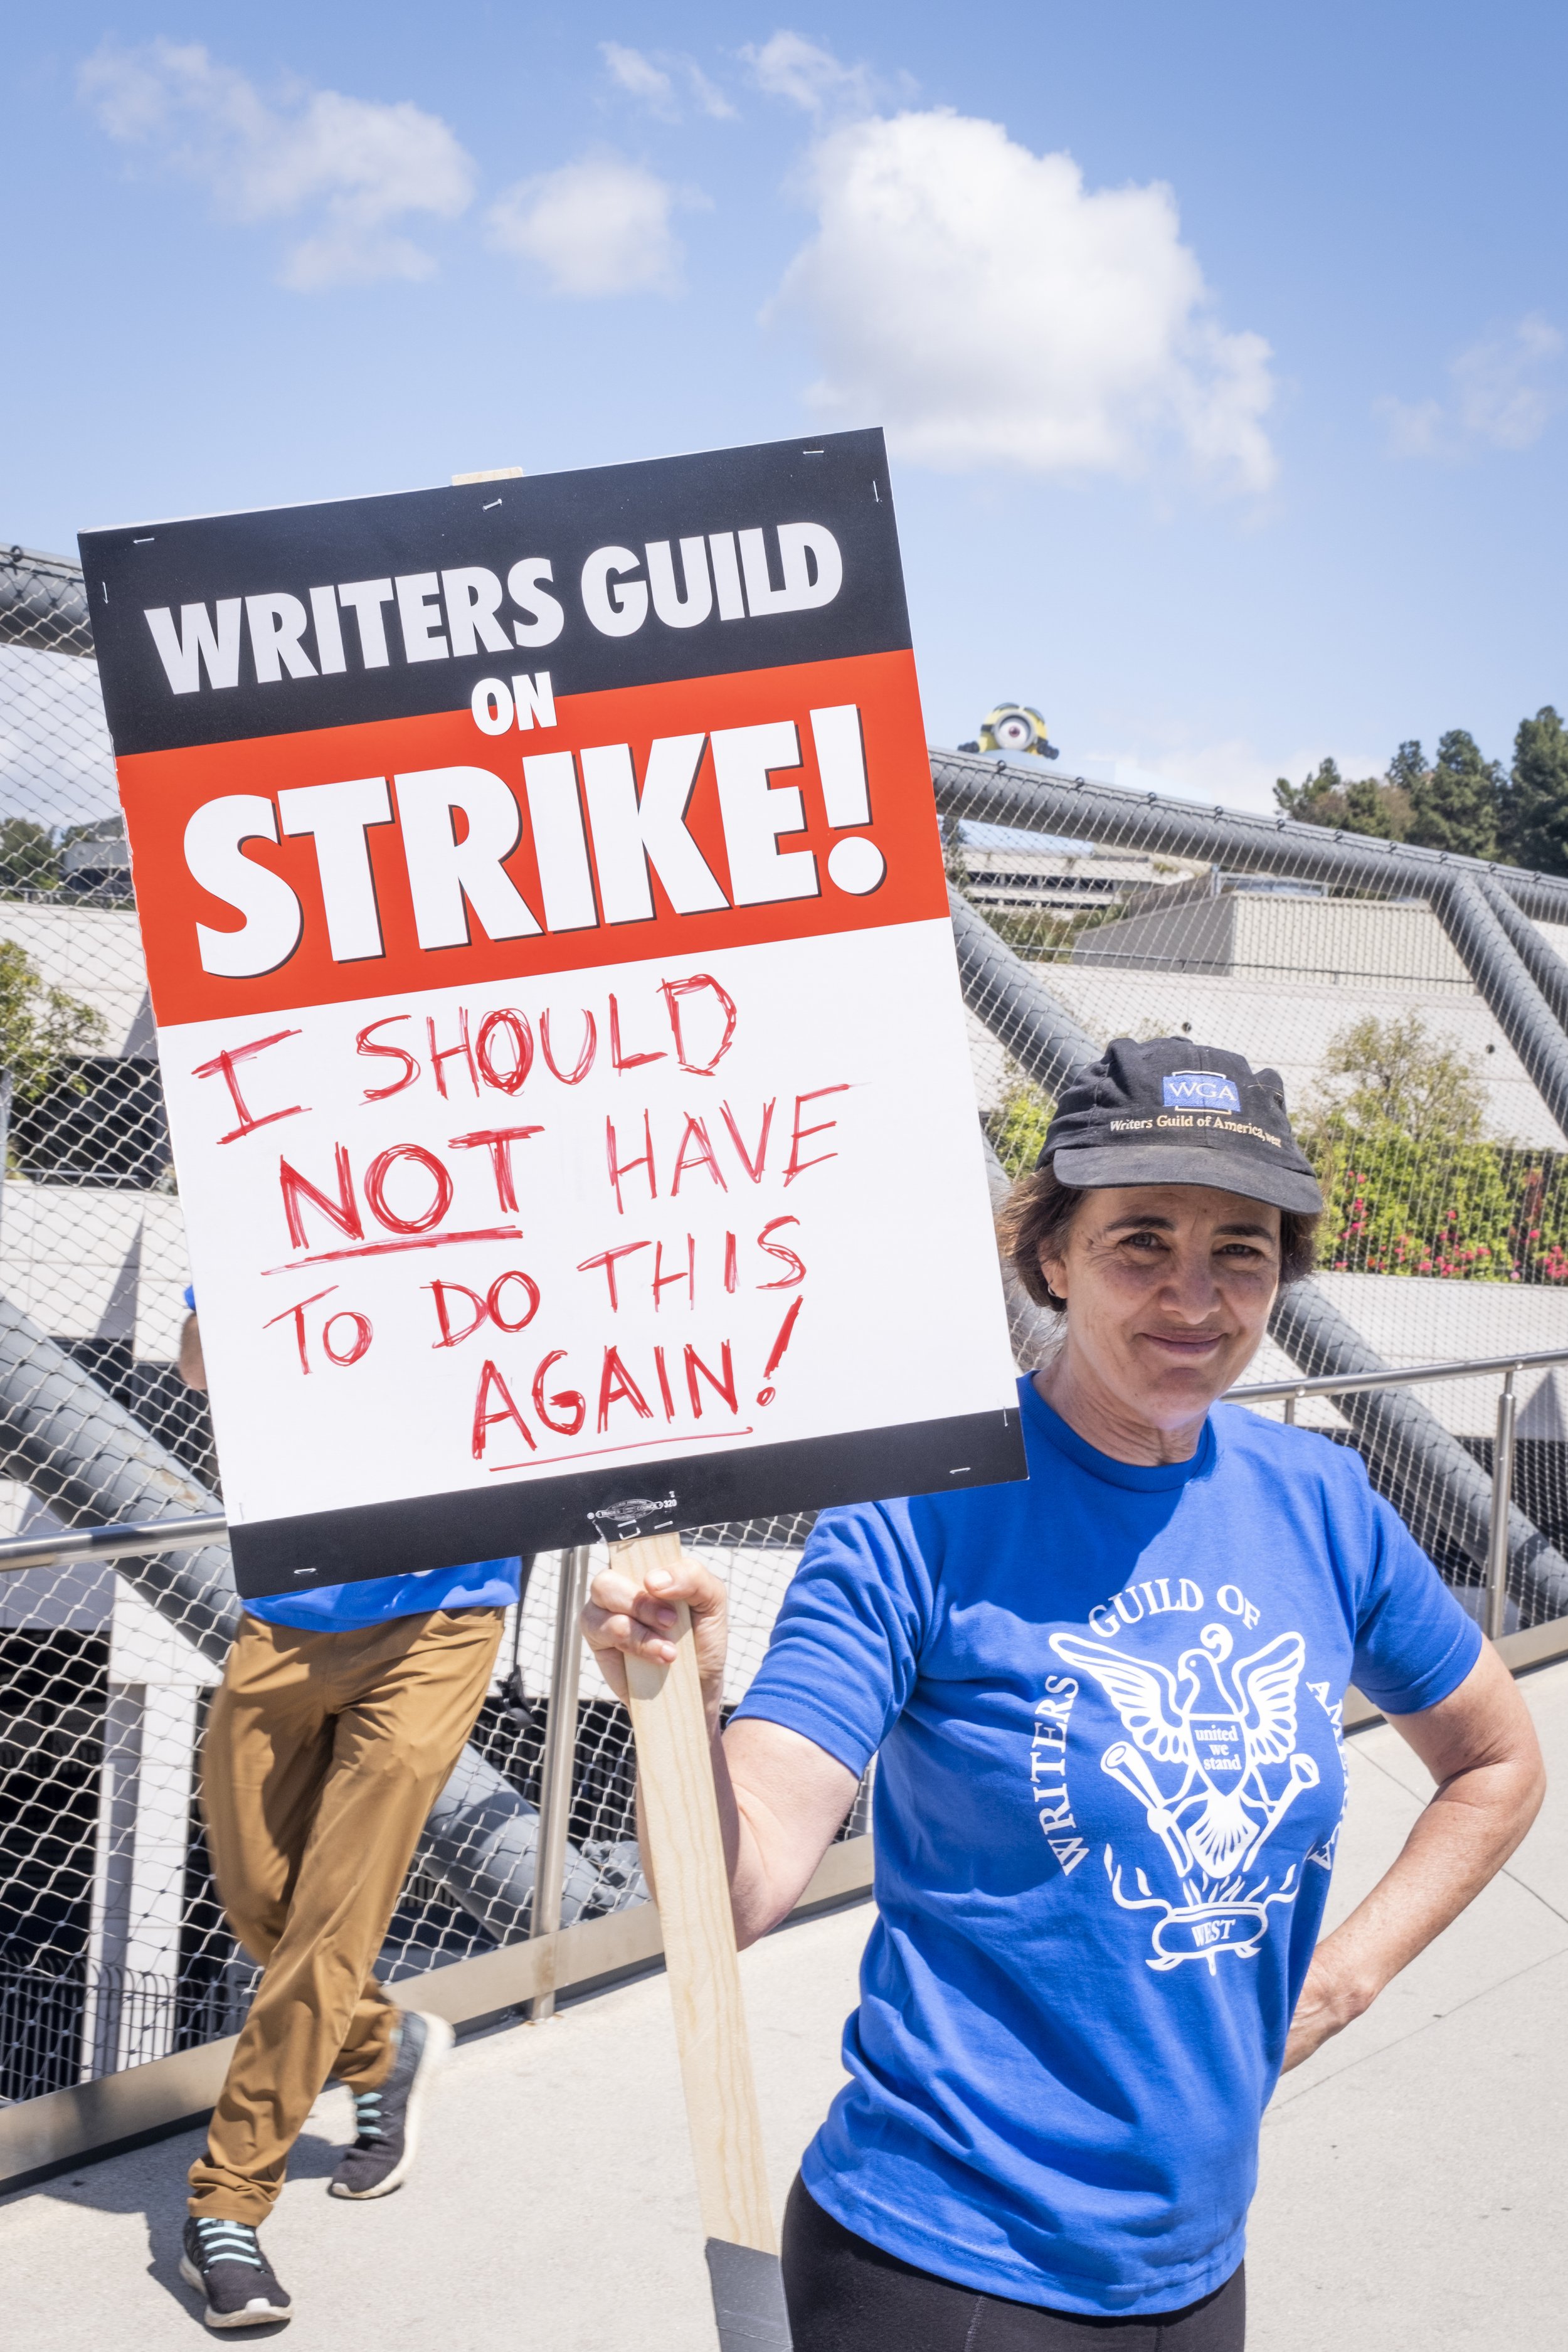  Lee Bridges attends her second WGA West strike, since 2008. “Because Wall Street has taken over the studios there is a culture of grabbing the highest profit margins you can in the shortest period of time, regardless of long-term sustainability. In 